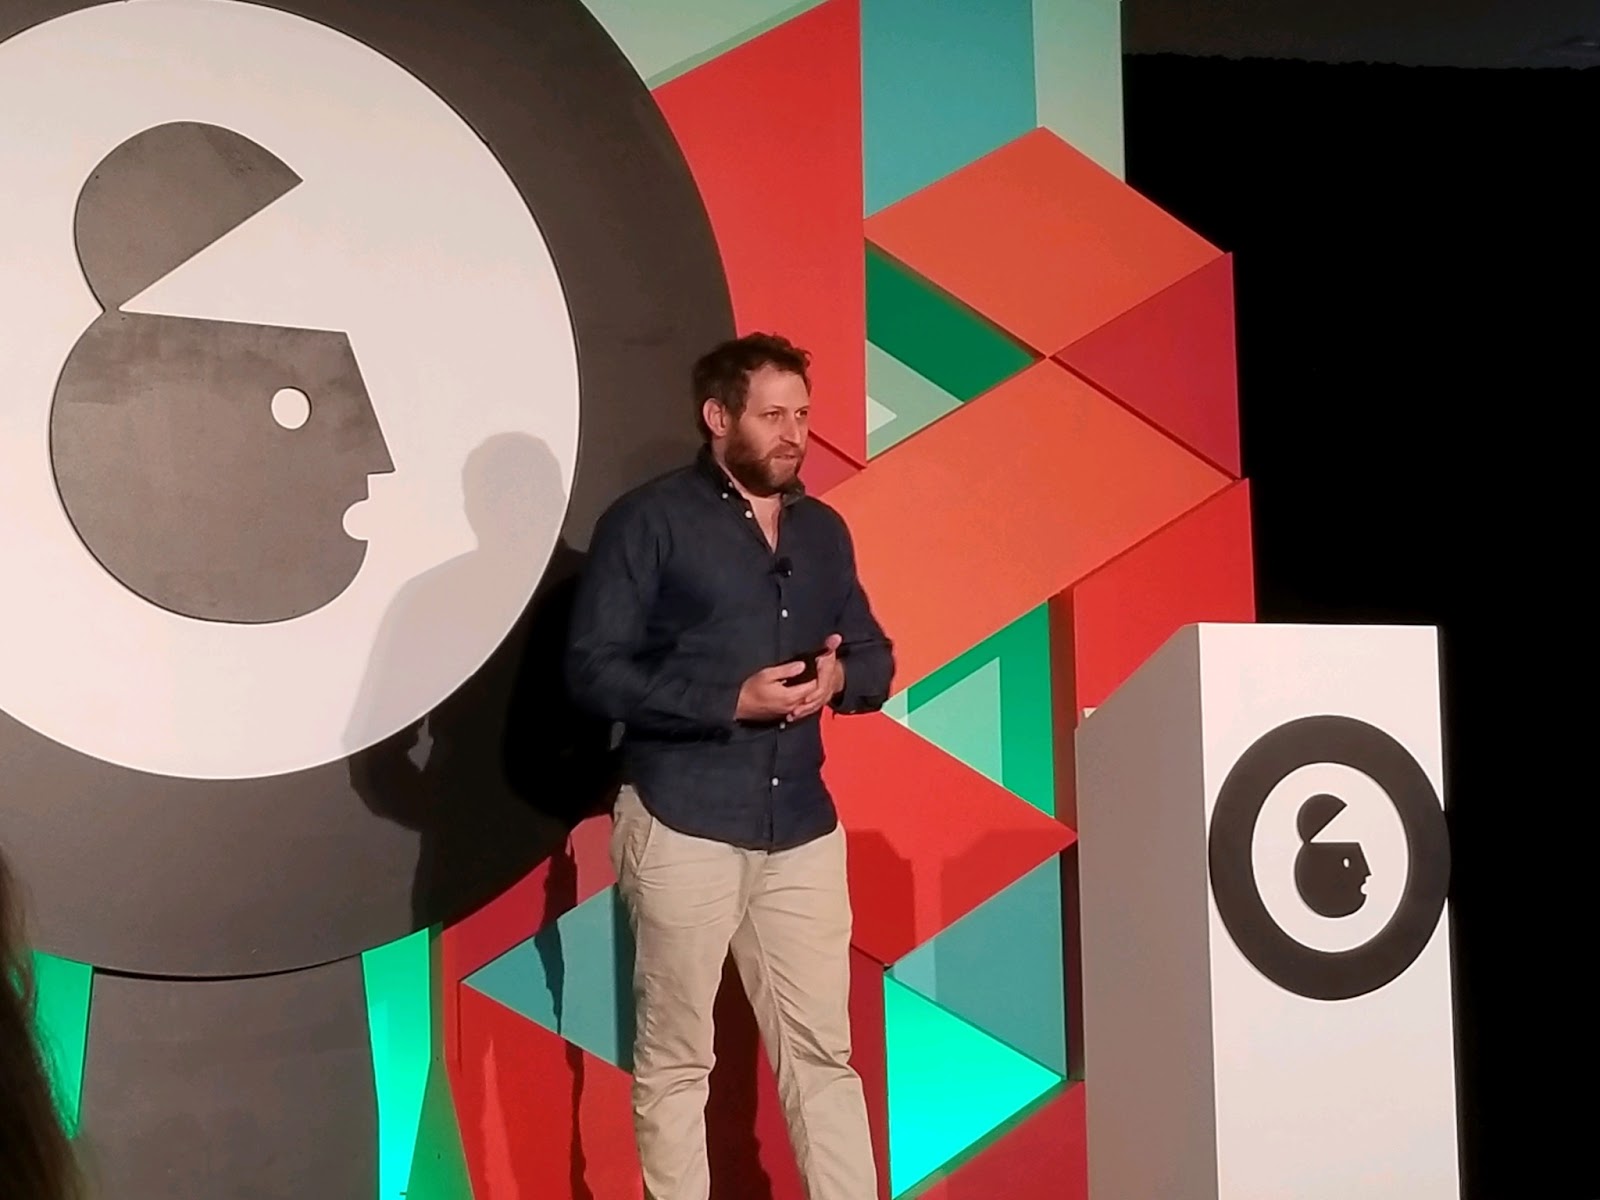       Alon Leibovich, Co-Founder & CEO, presenting at Advertising Week